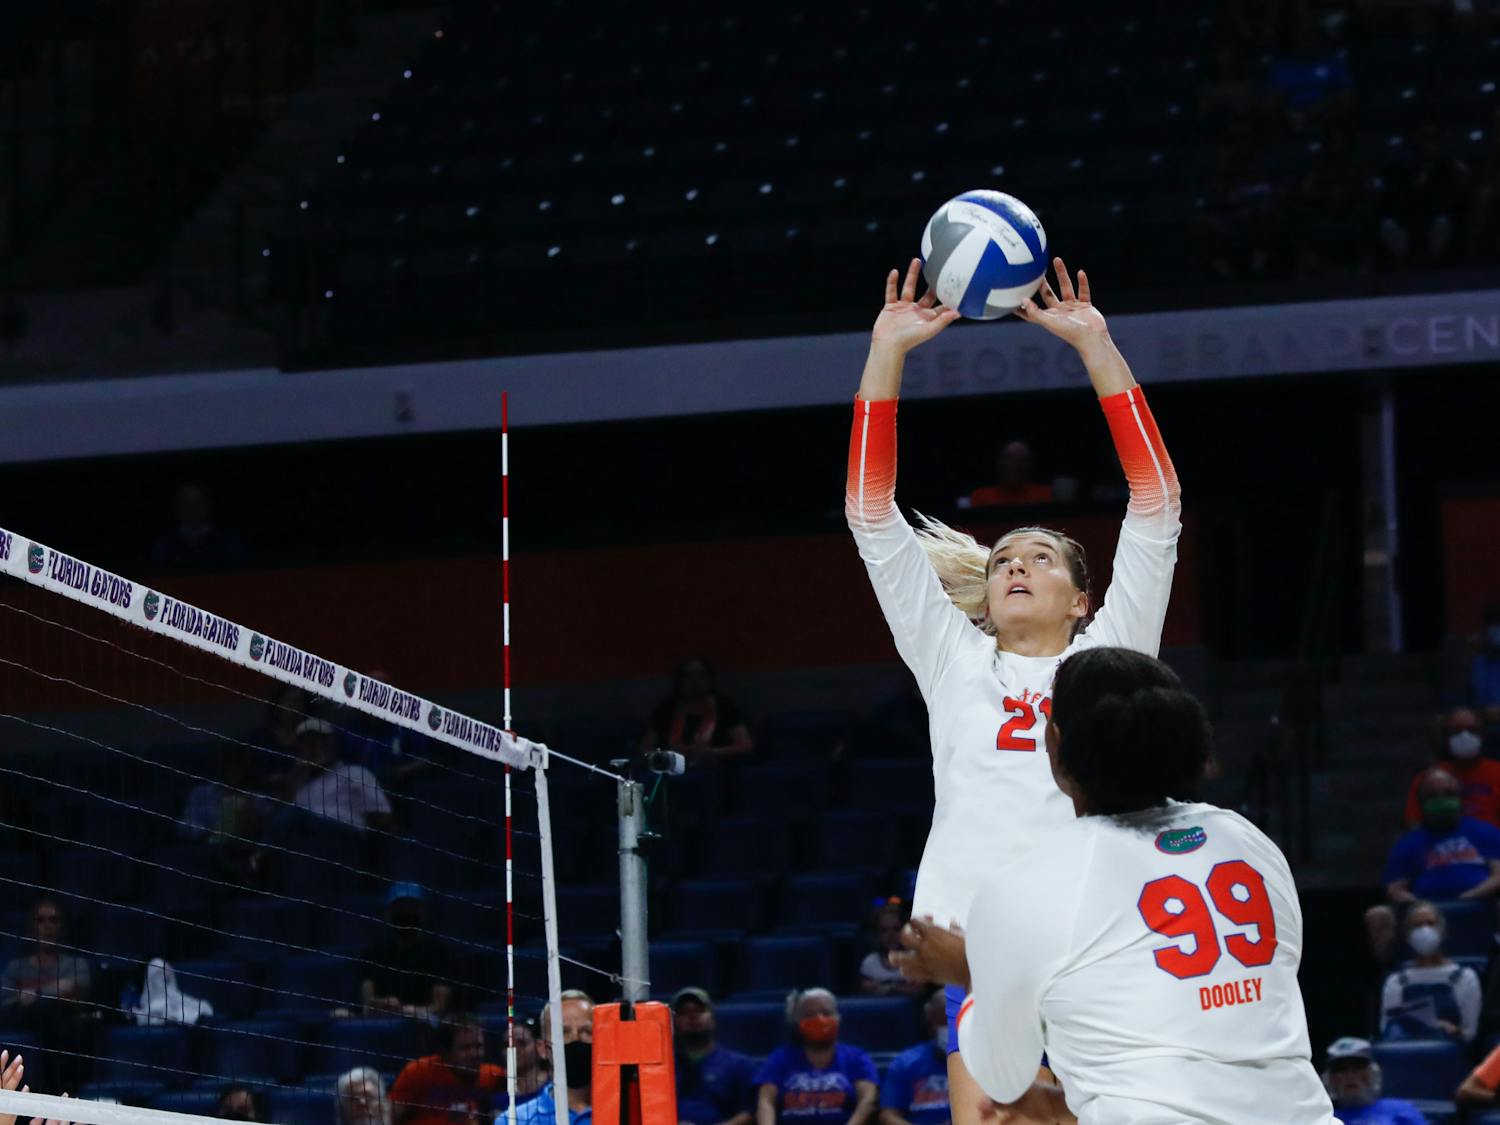 Florida's Marlie Monserez sets the ball for a teammate during a game against Texas A&M on October 16.